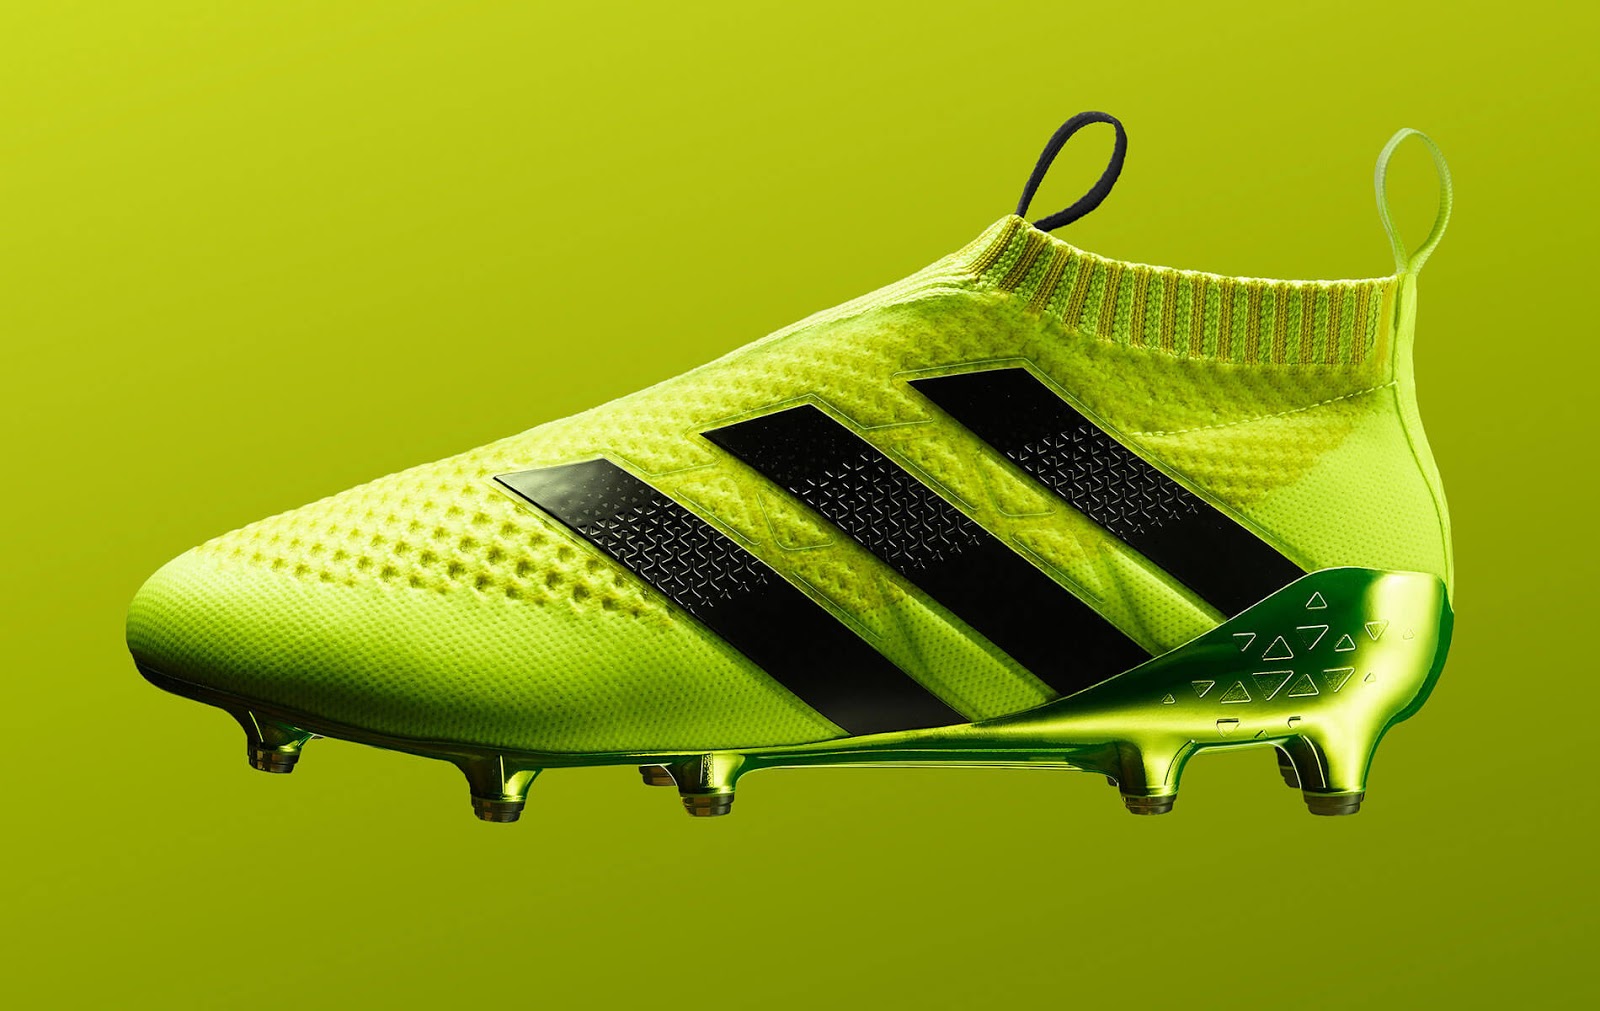 Adidas Speed of Light Football Boots Pack Released - Footy Headlines